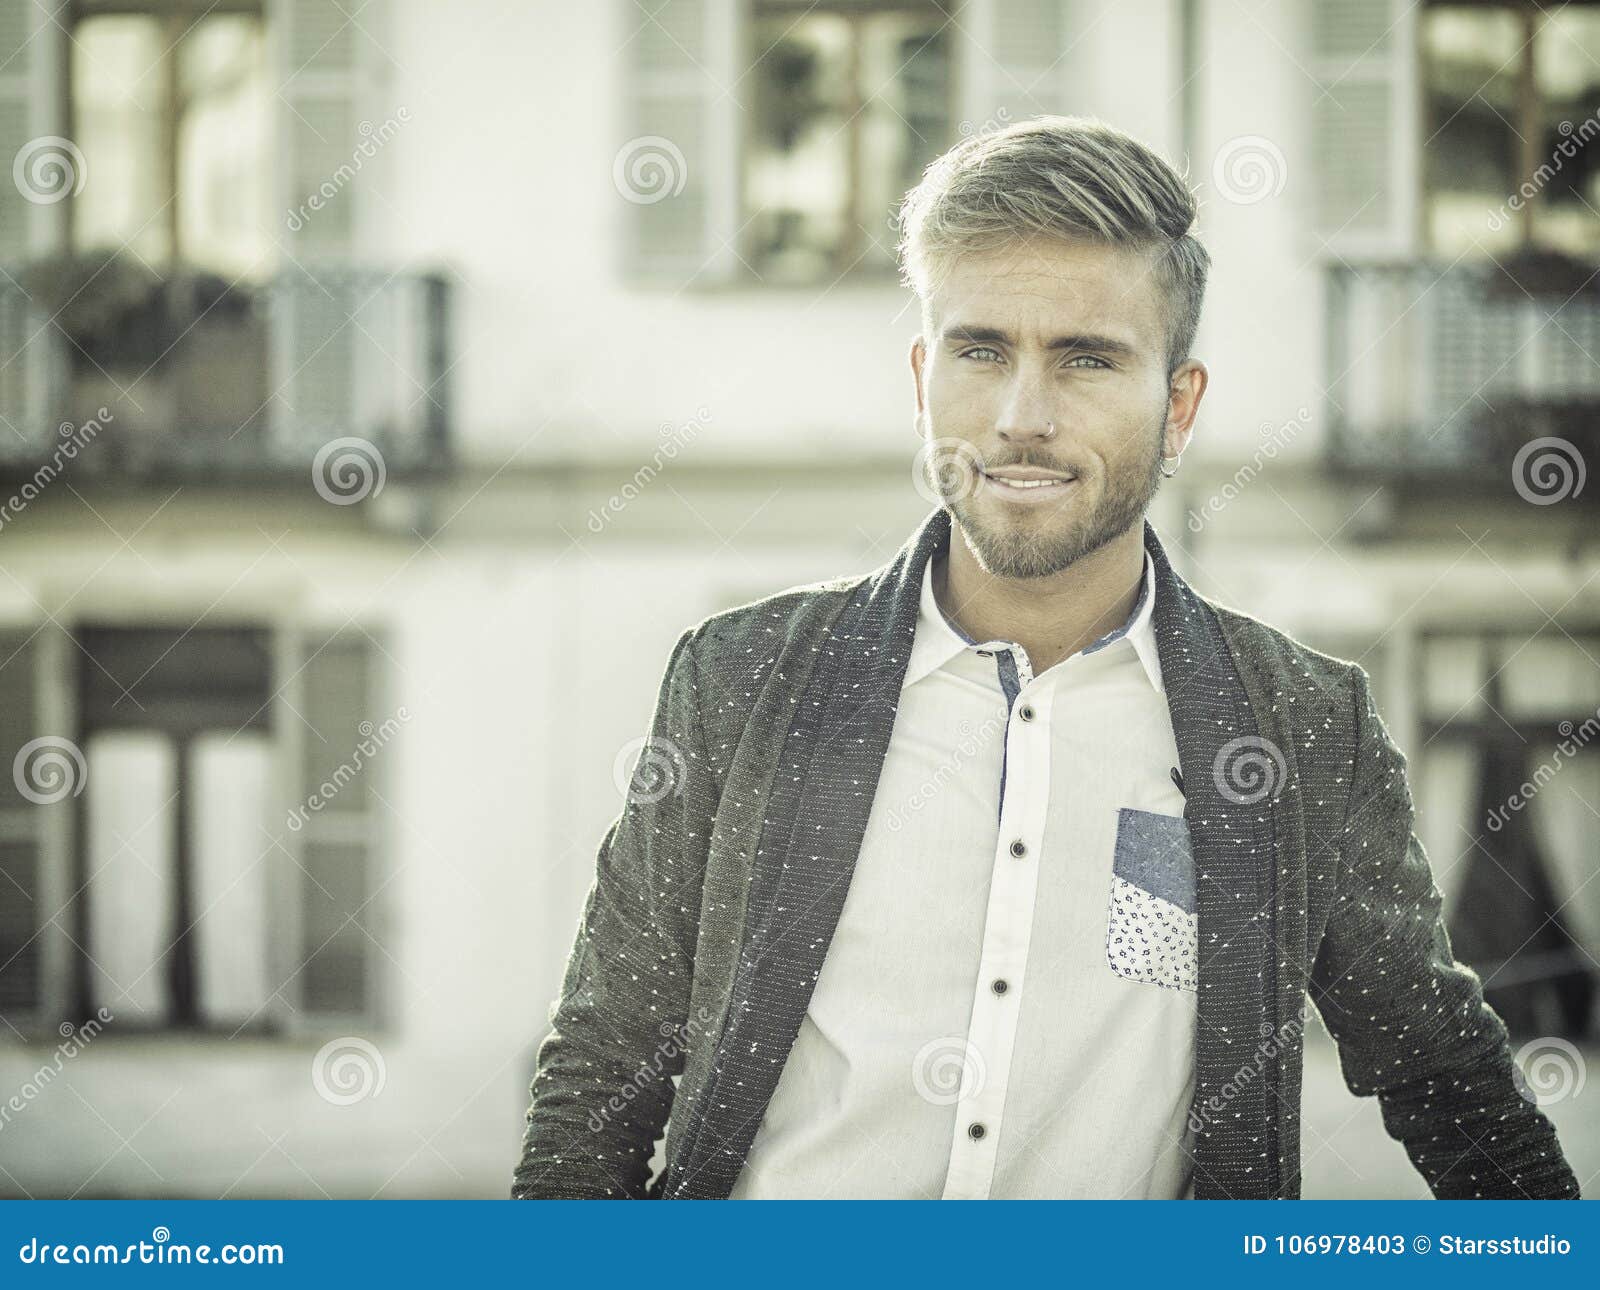 Handsome Trendy Young Man in European City Stock Image - Image of ...